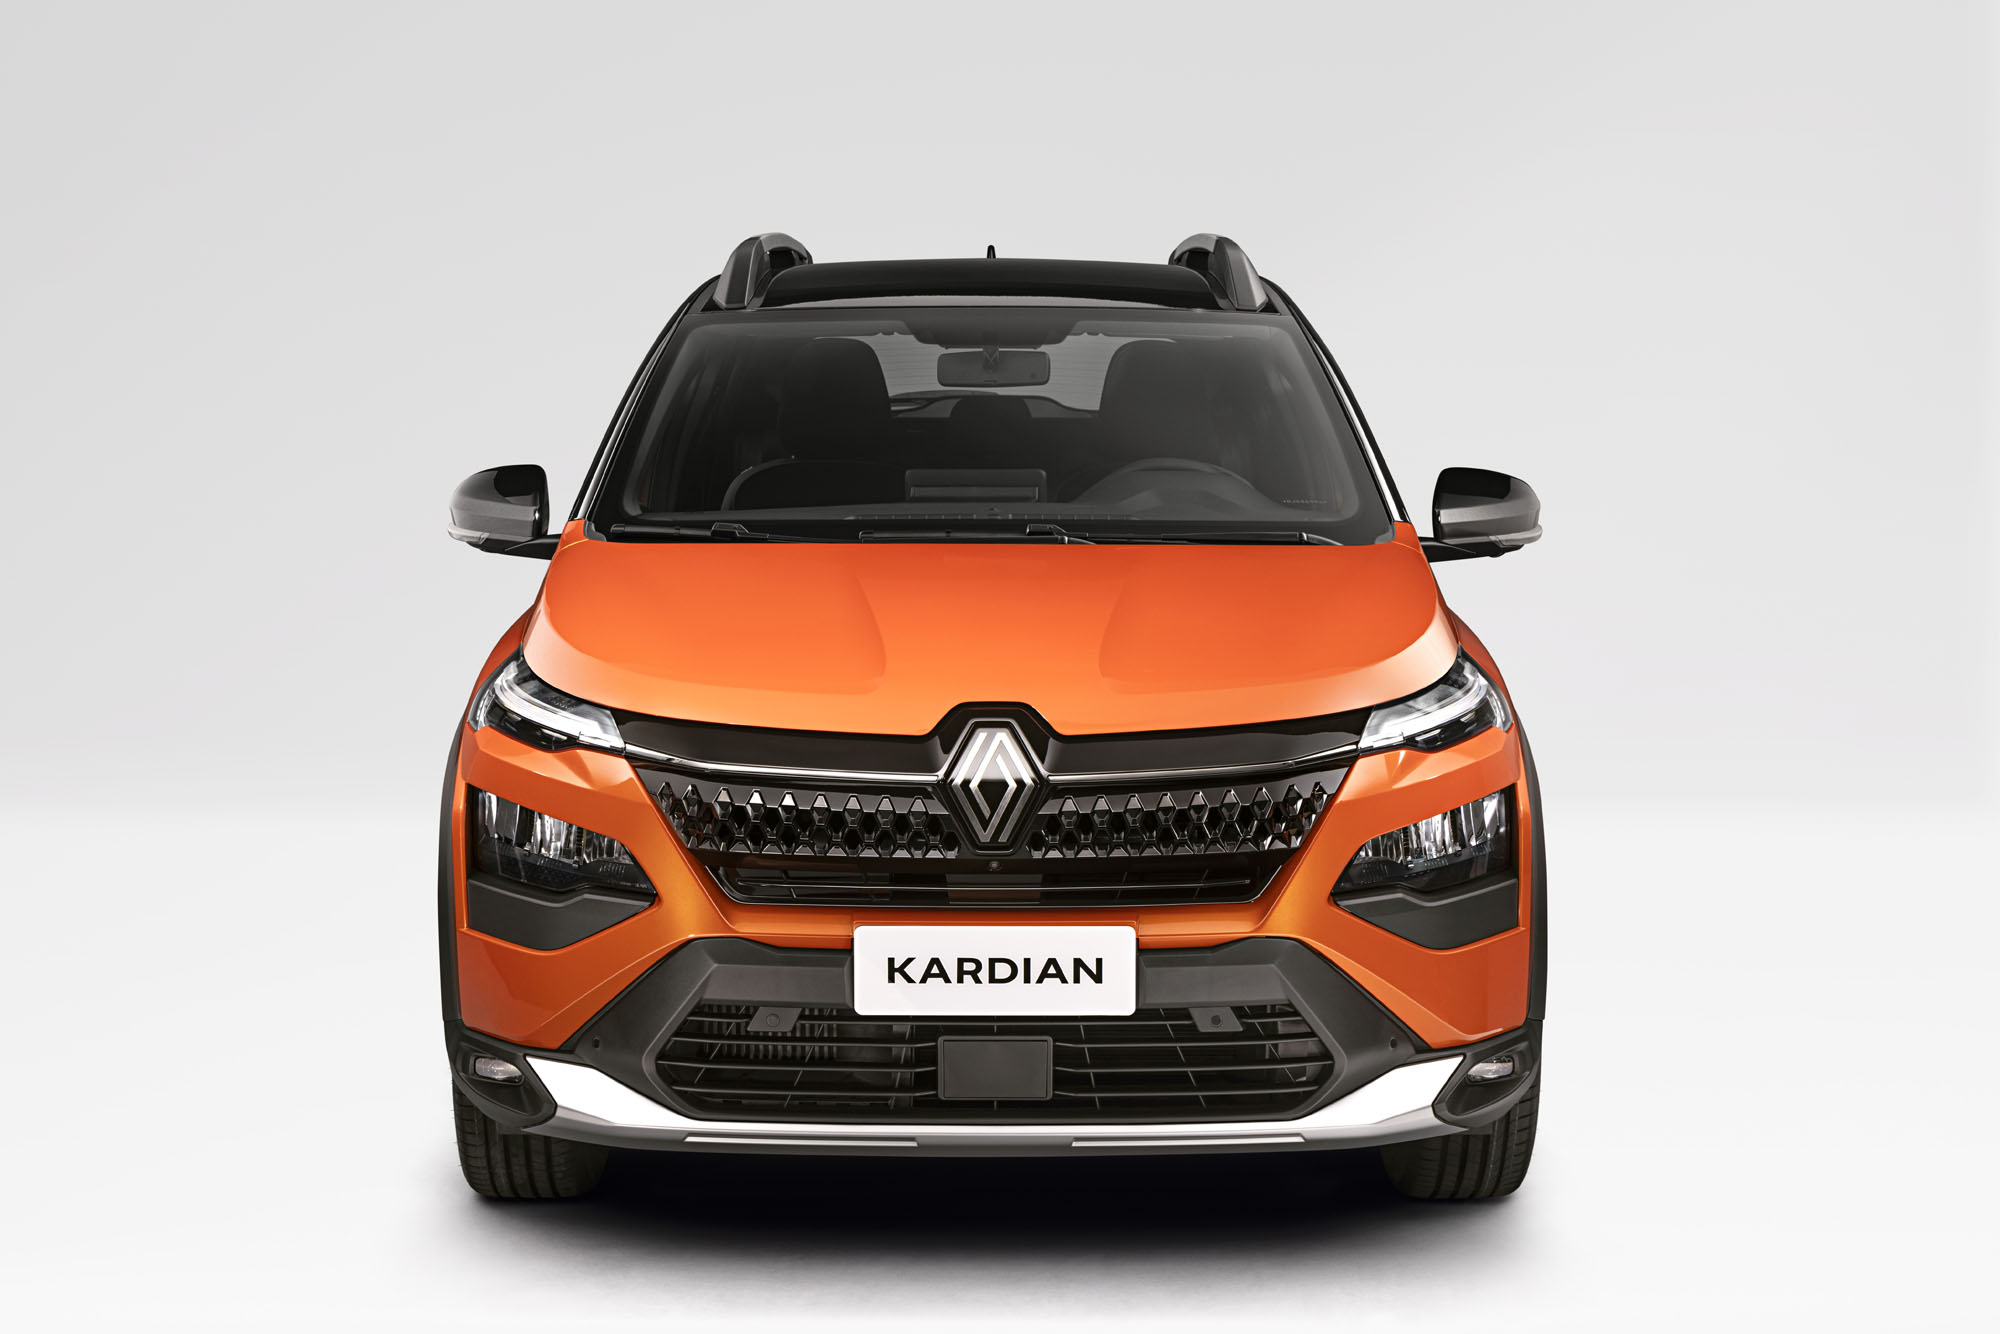 renault, renault kardian, new renault kardian unveiled – everything you need to know